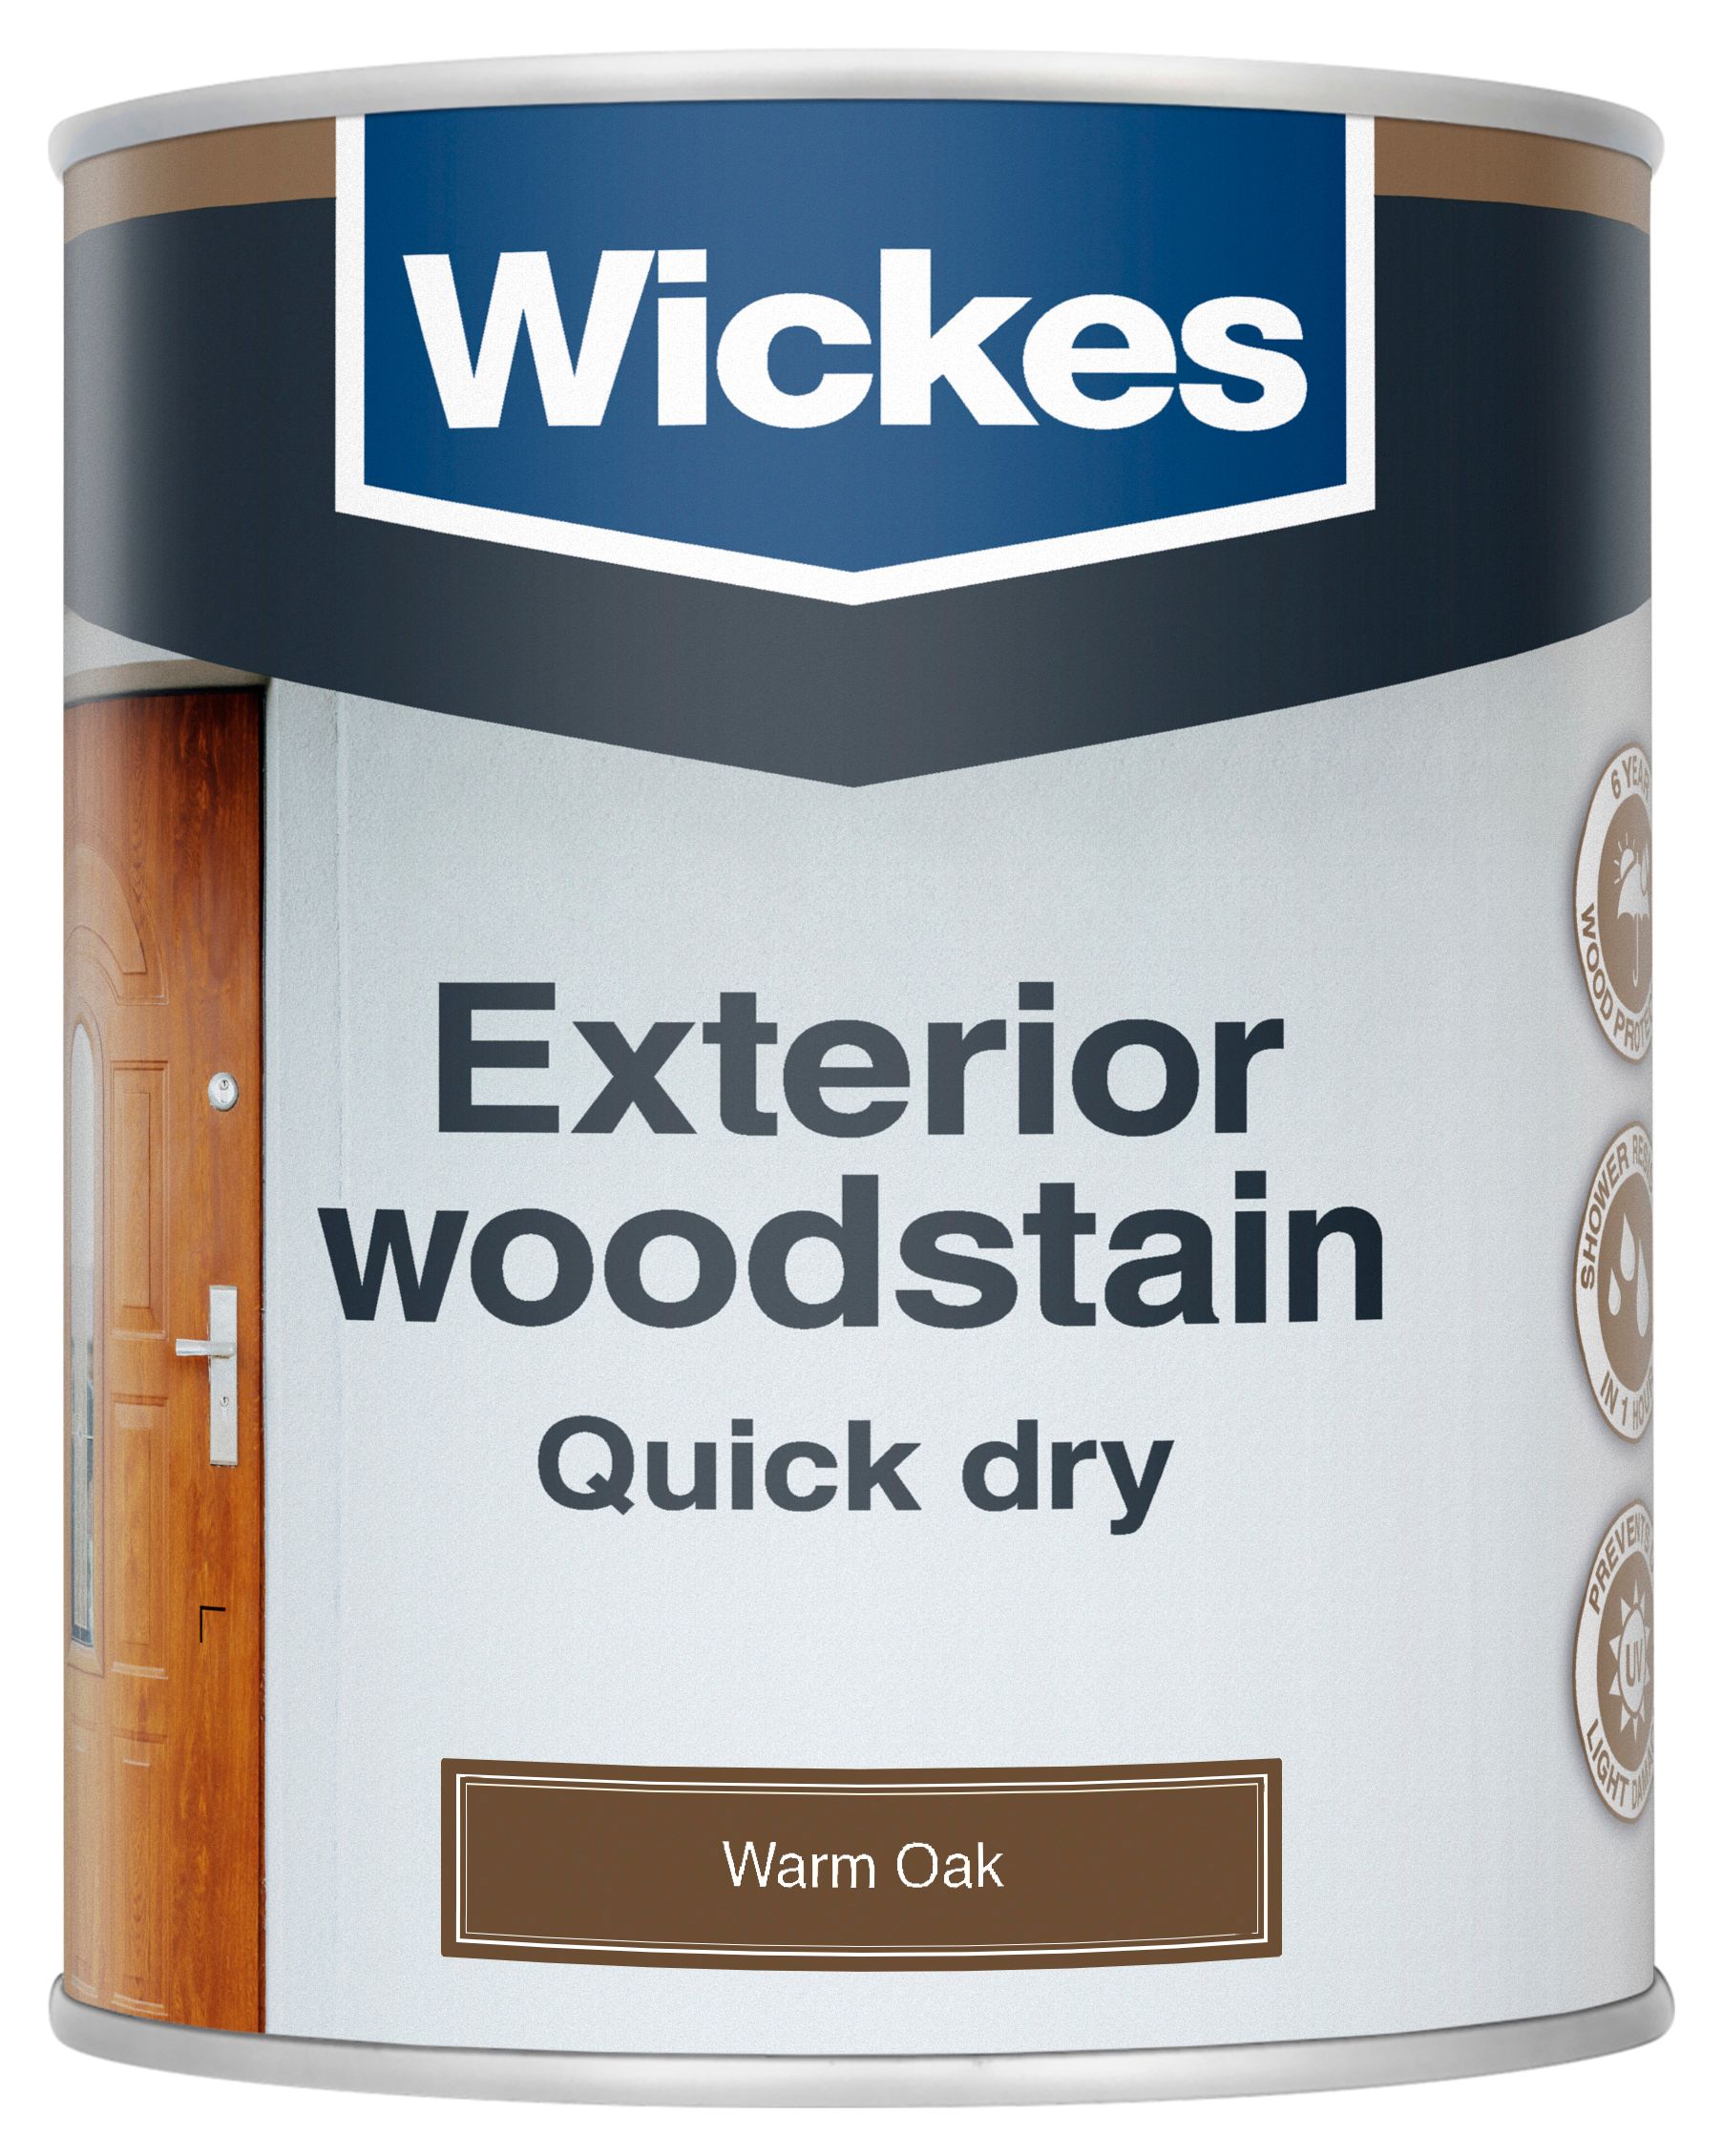 Image of Wickes Exterior Quick Dry Woodstain - Warm Oak - 750ml